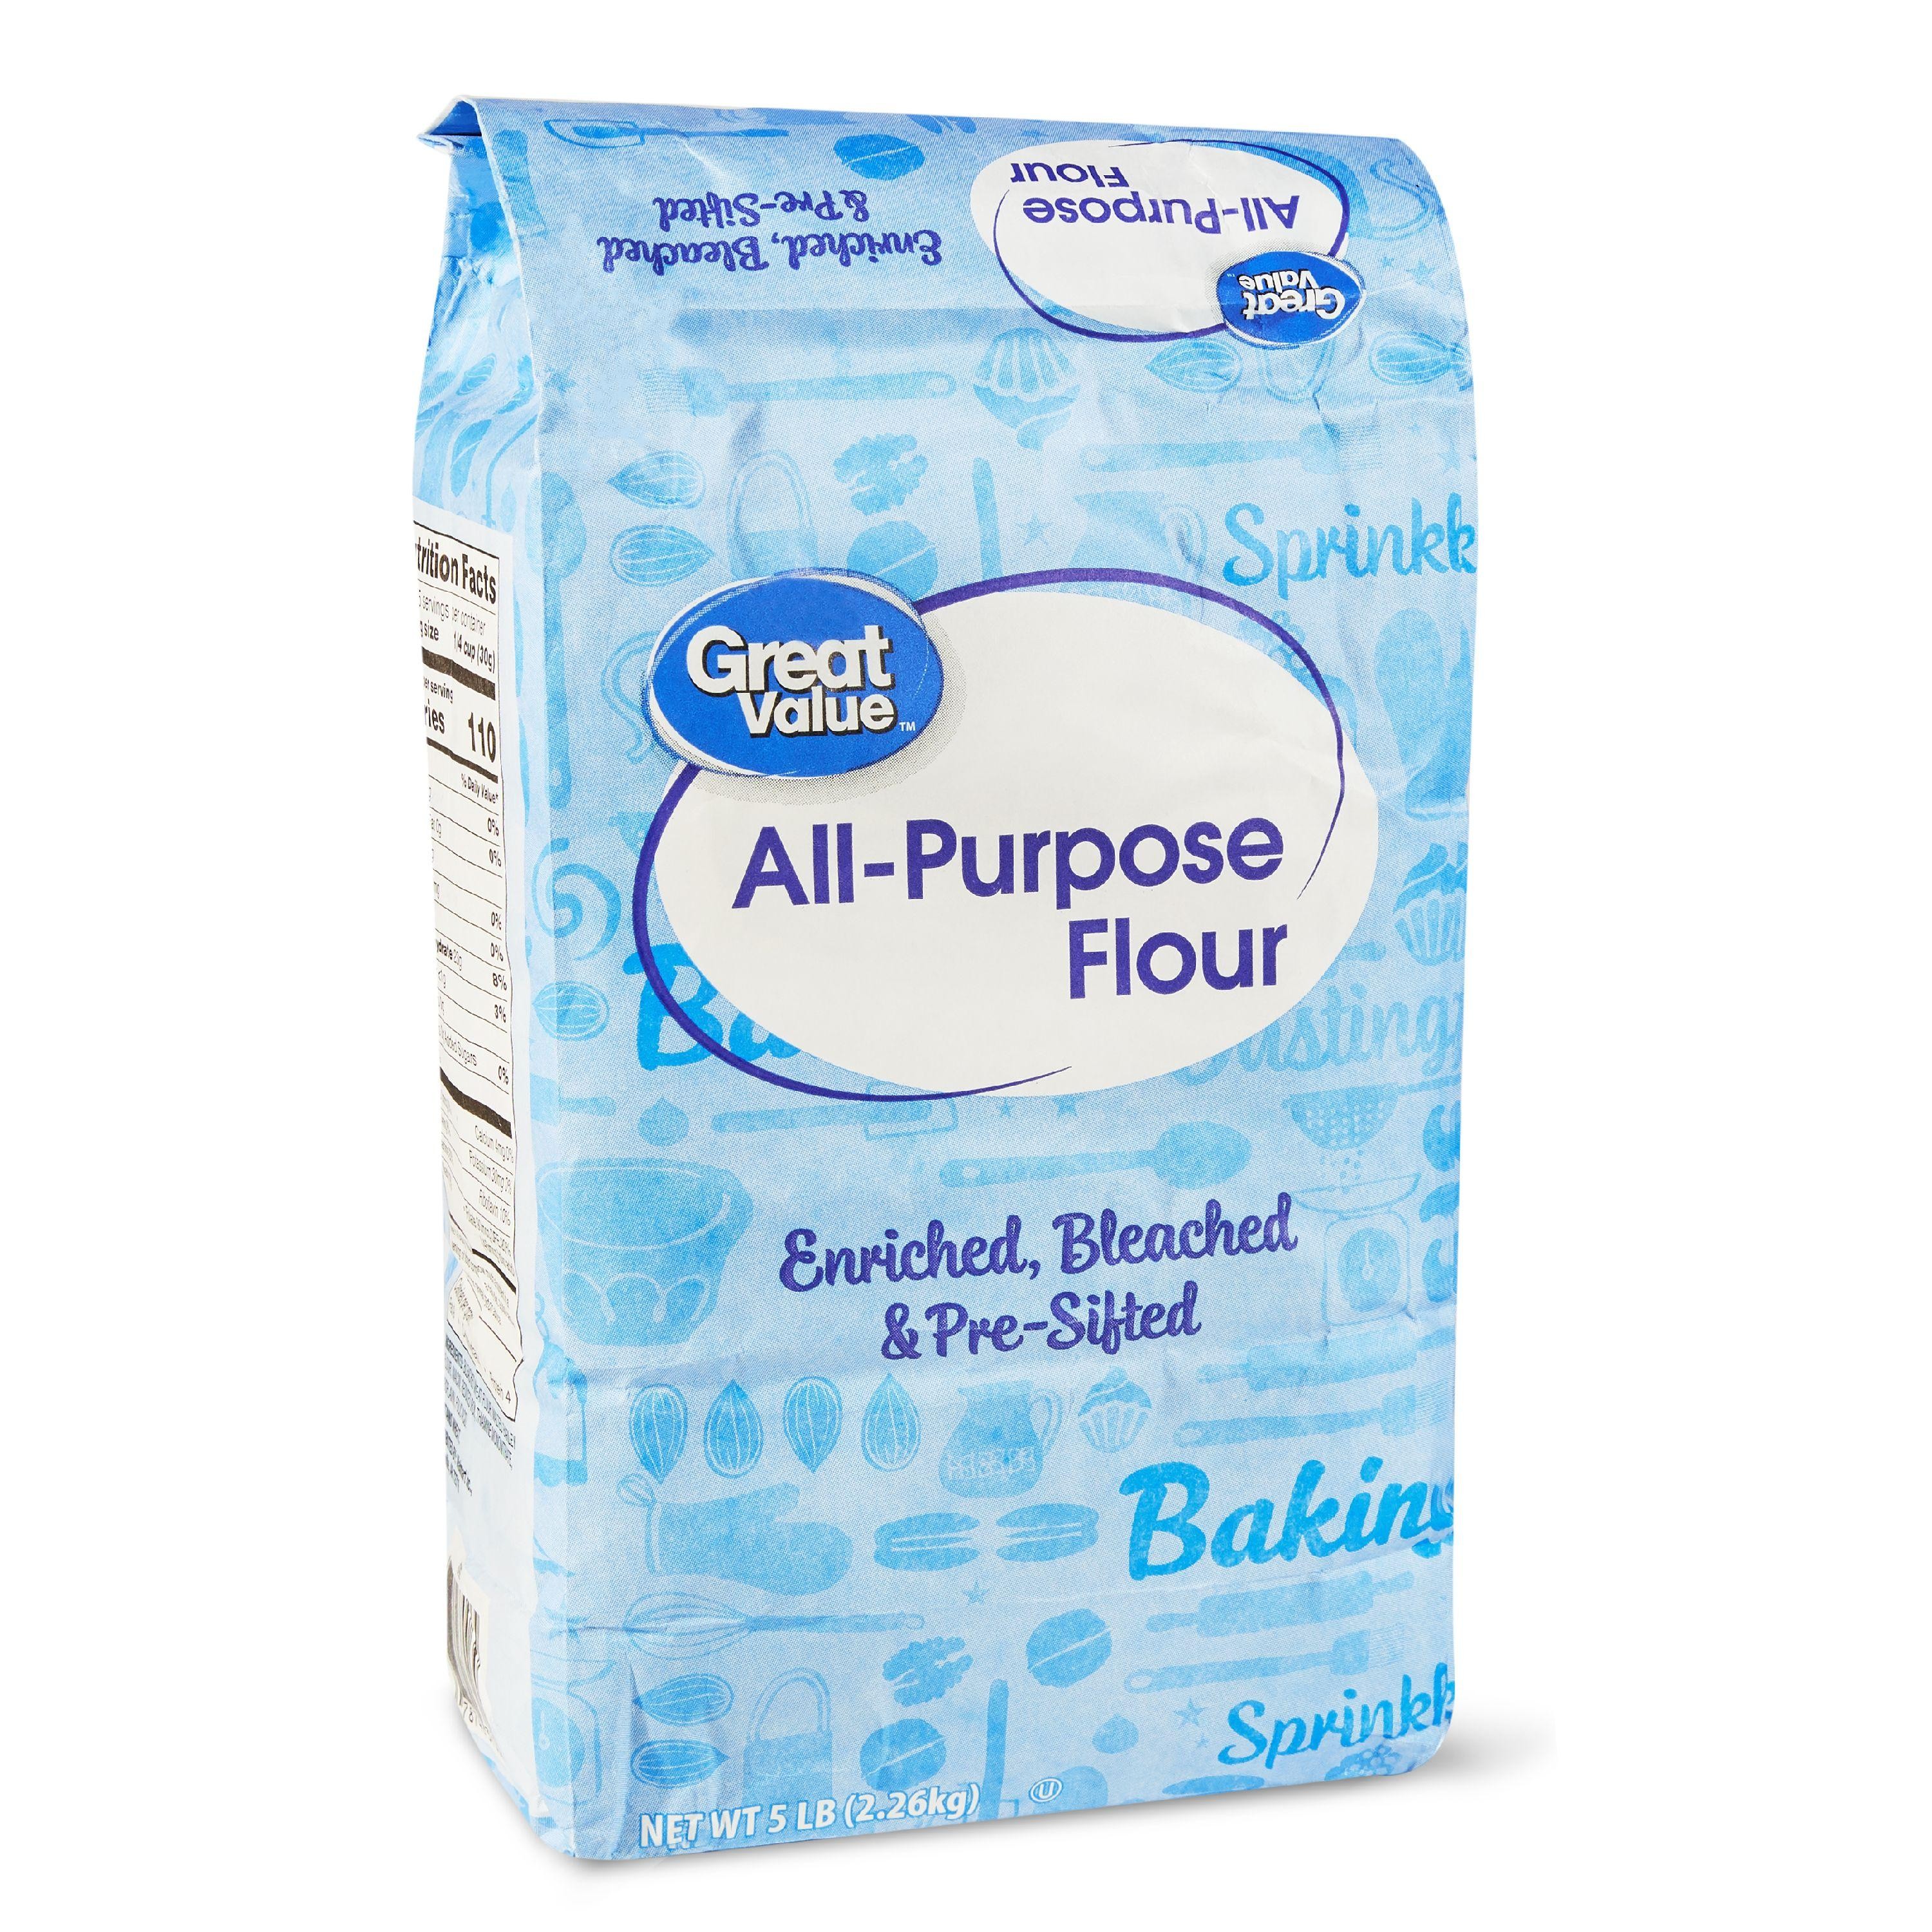 All-purpose Flour Enriched, Bleached & Pre-sifted